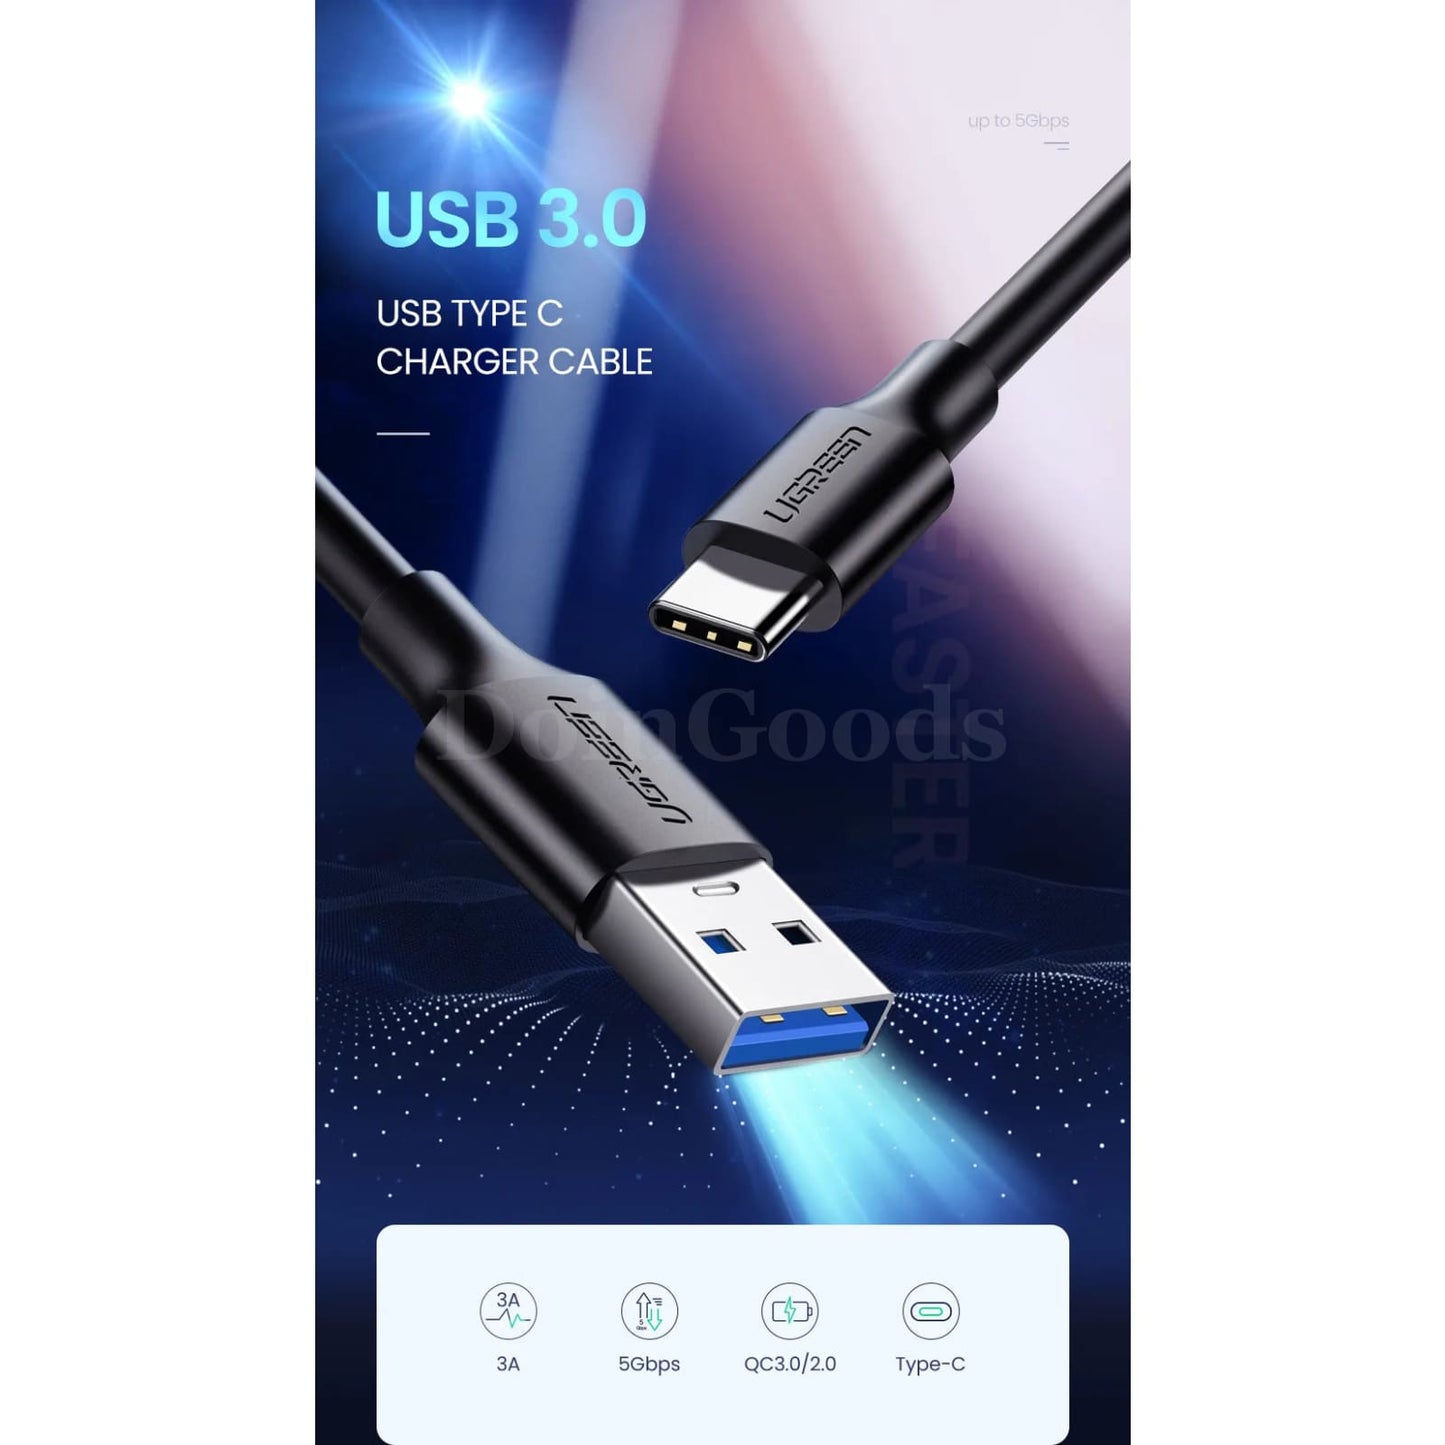 Ugreen Usb 3.0 A To Type C Cable 5Gbps Superspeed Data Ipad Pro Ssd M2 Enclosure 301635